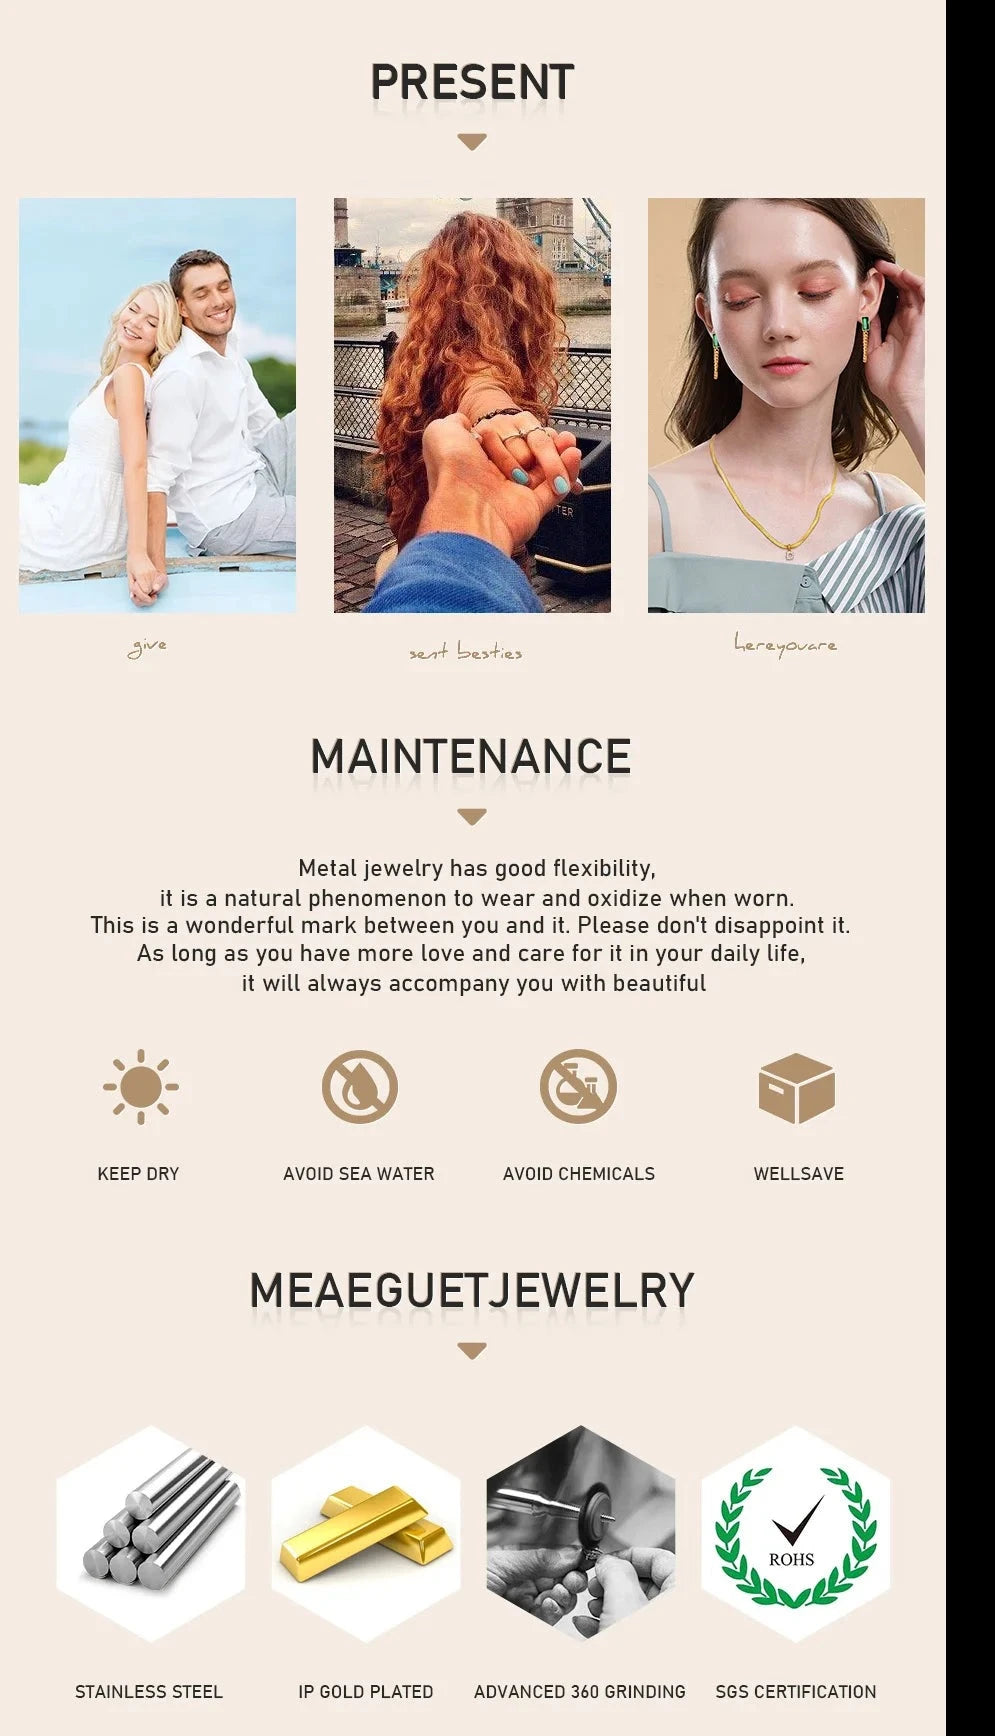 How to Care and Maintain Stainless Steel Jewelry